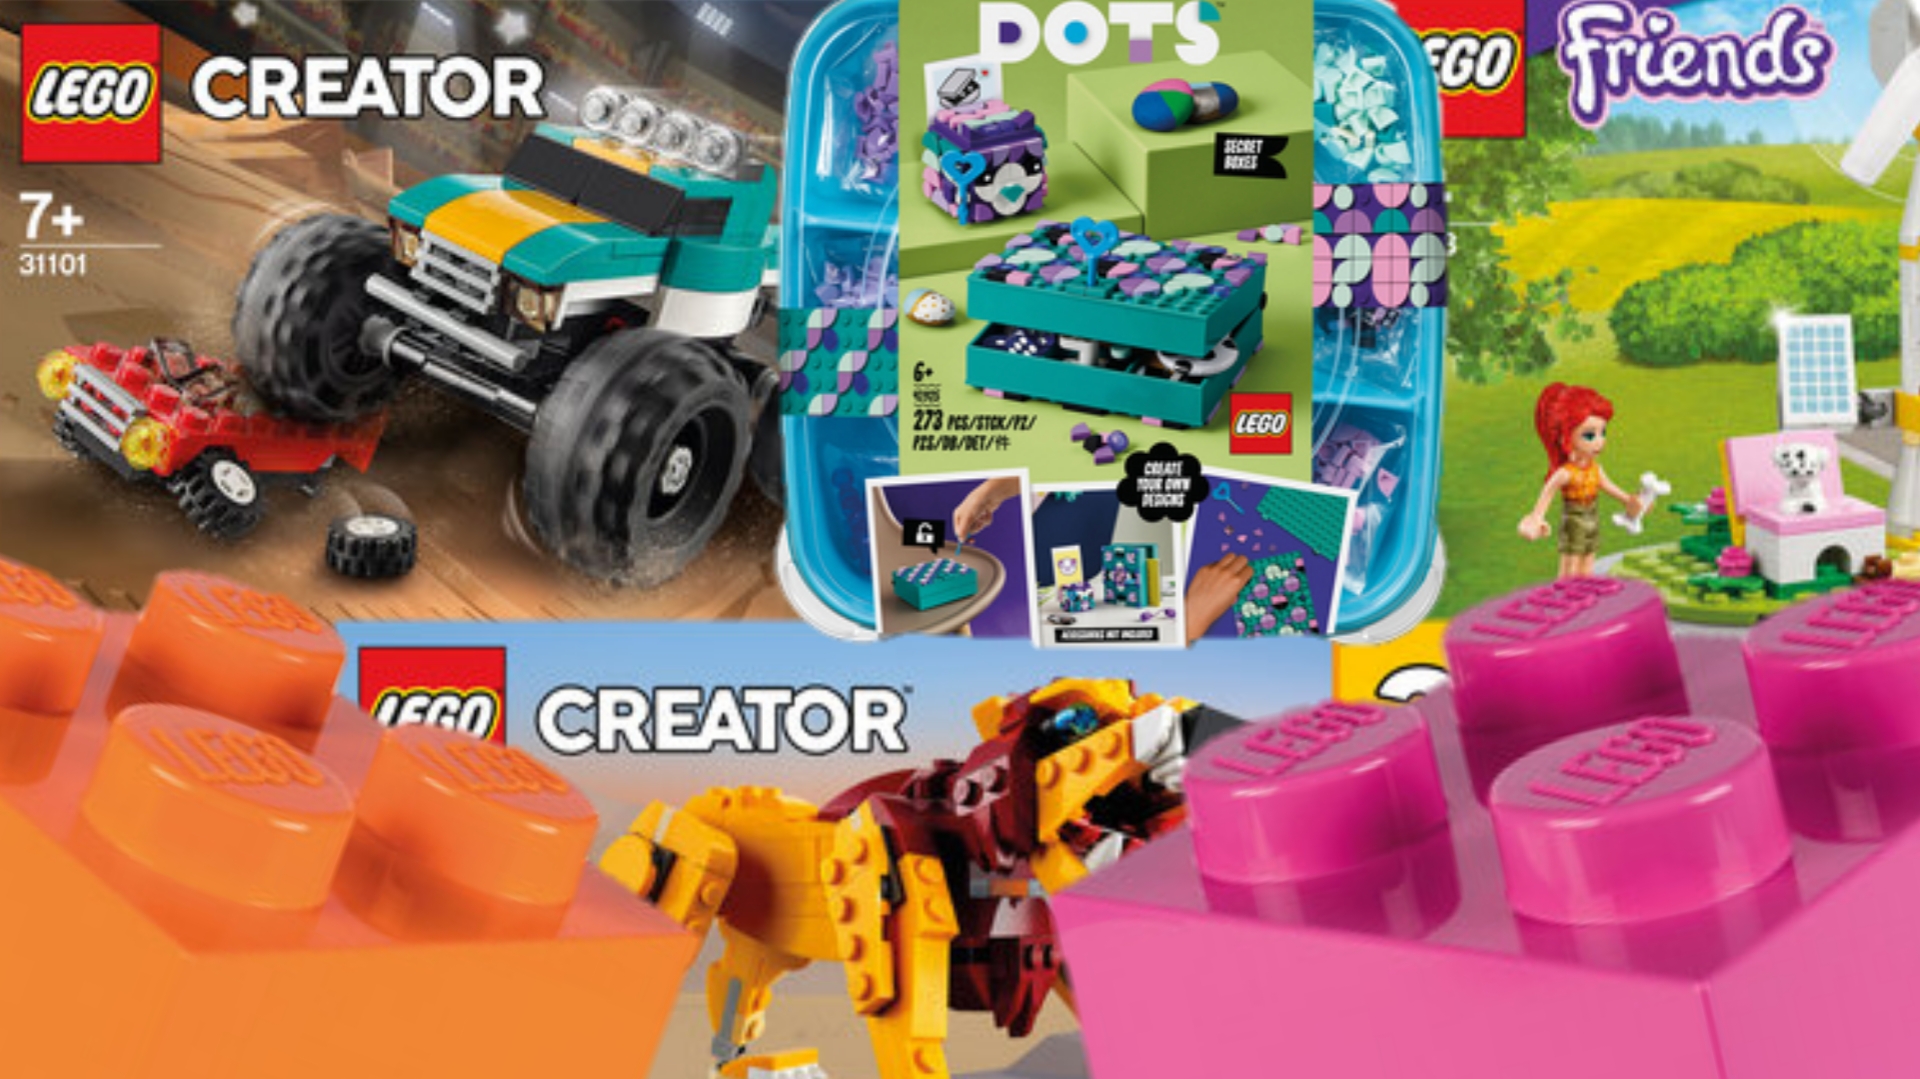 Beter bezorgdheid Dollar LEGO Sets & Storage Boxes at Lidl 26th August 2021! – The Brick Post!